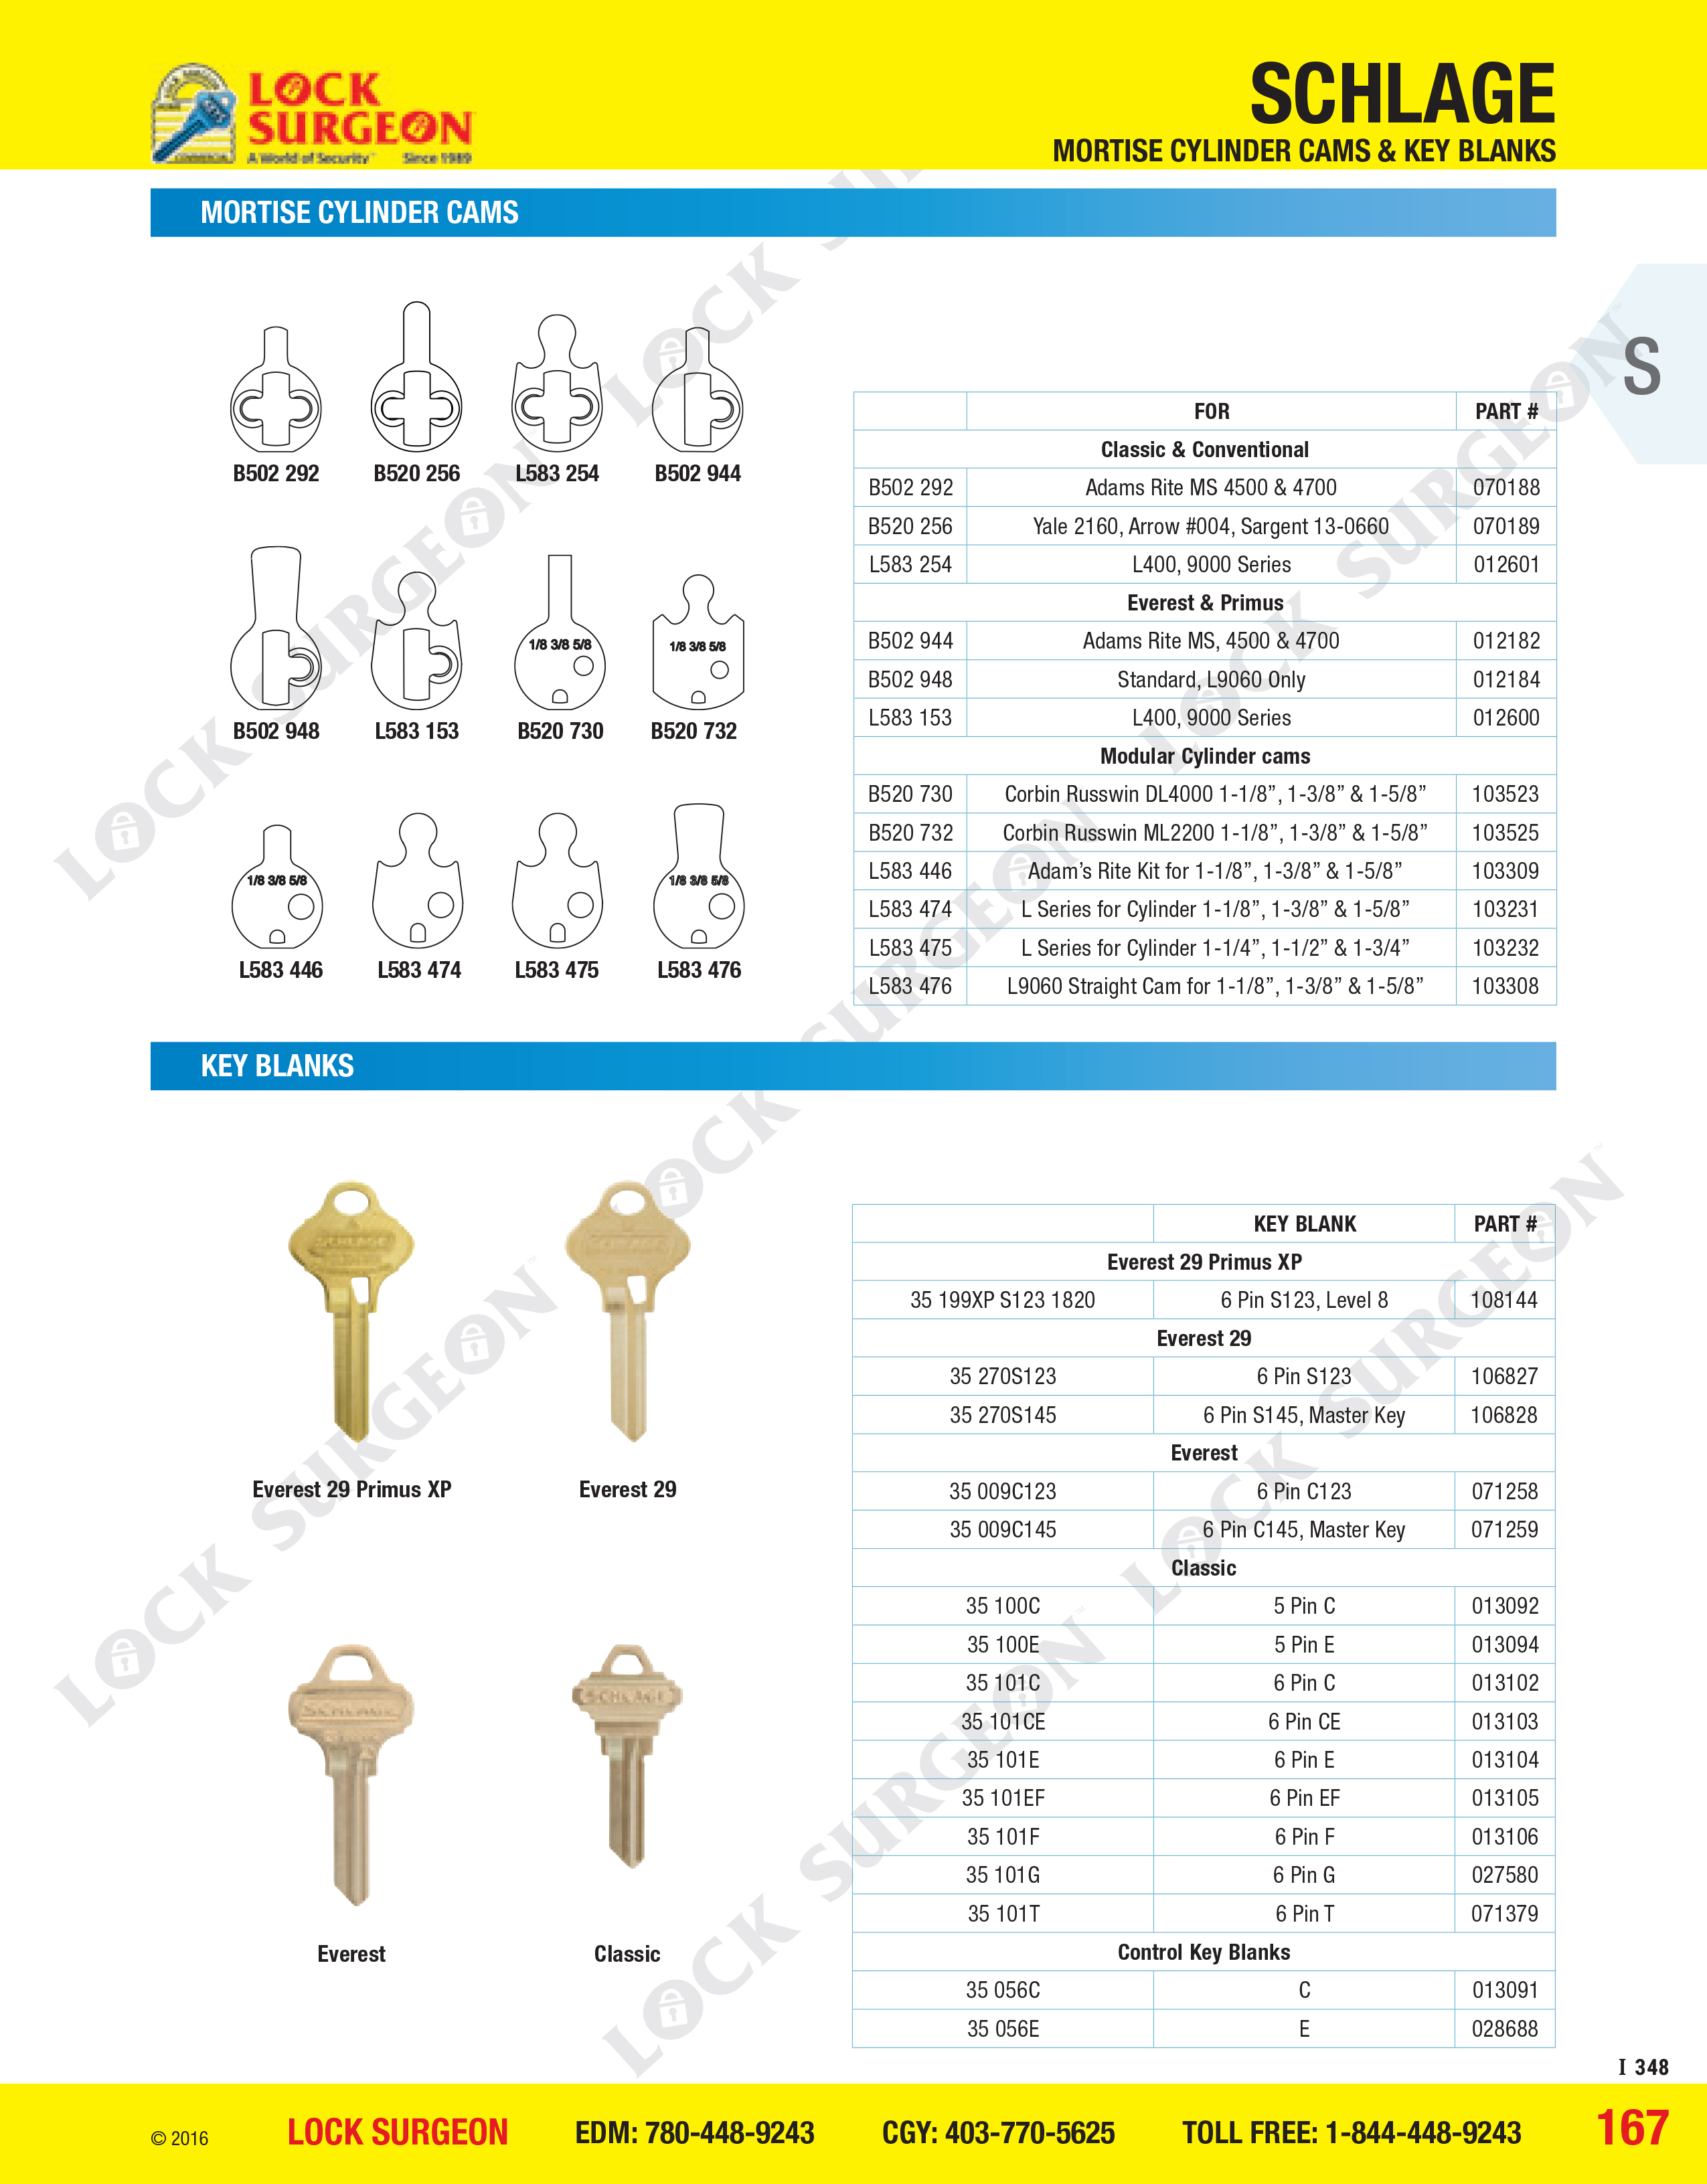 Schlage mortise cylinder cams and key blanks